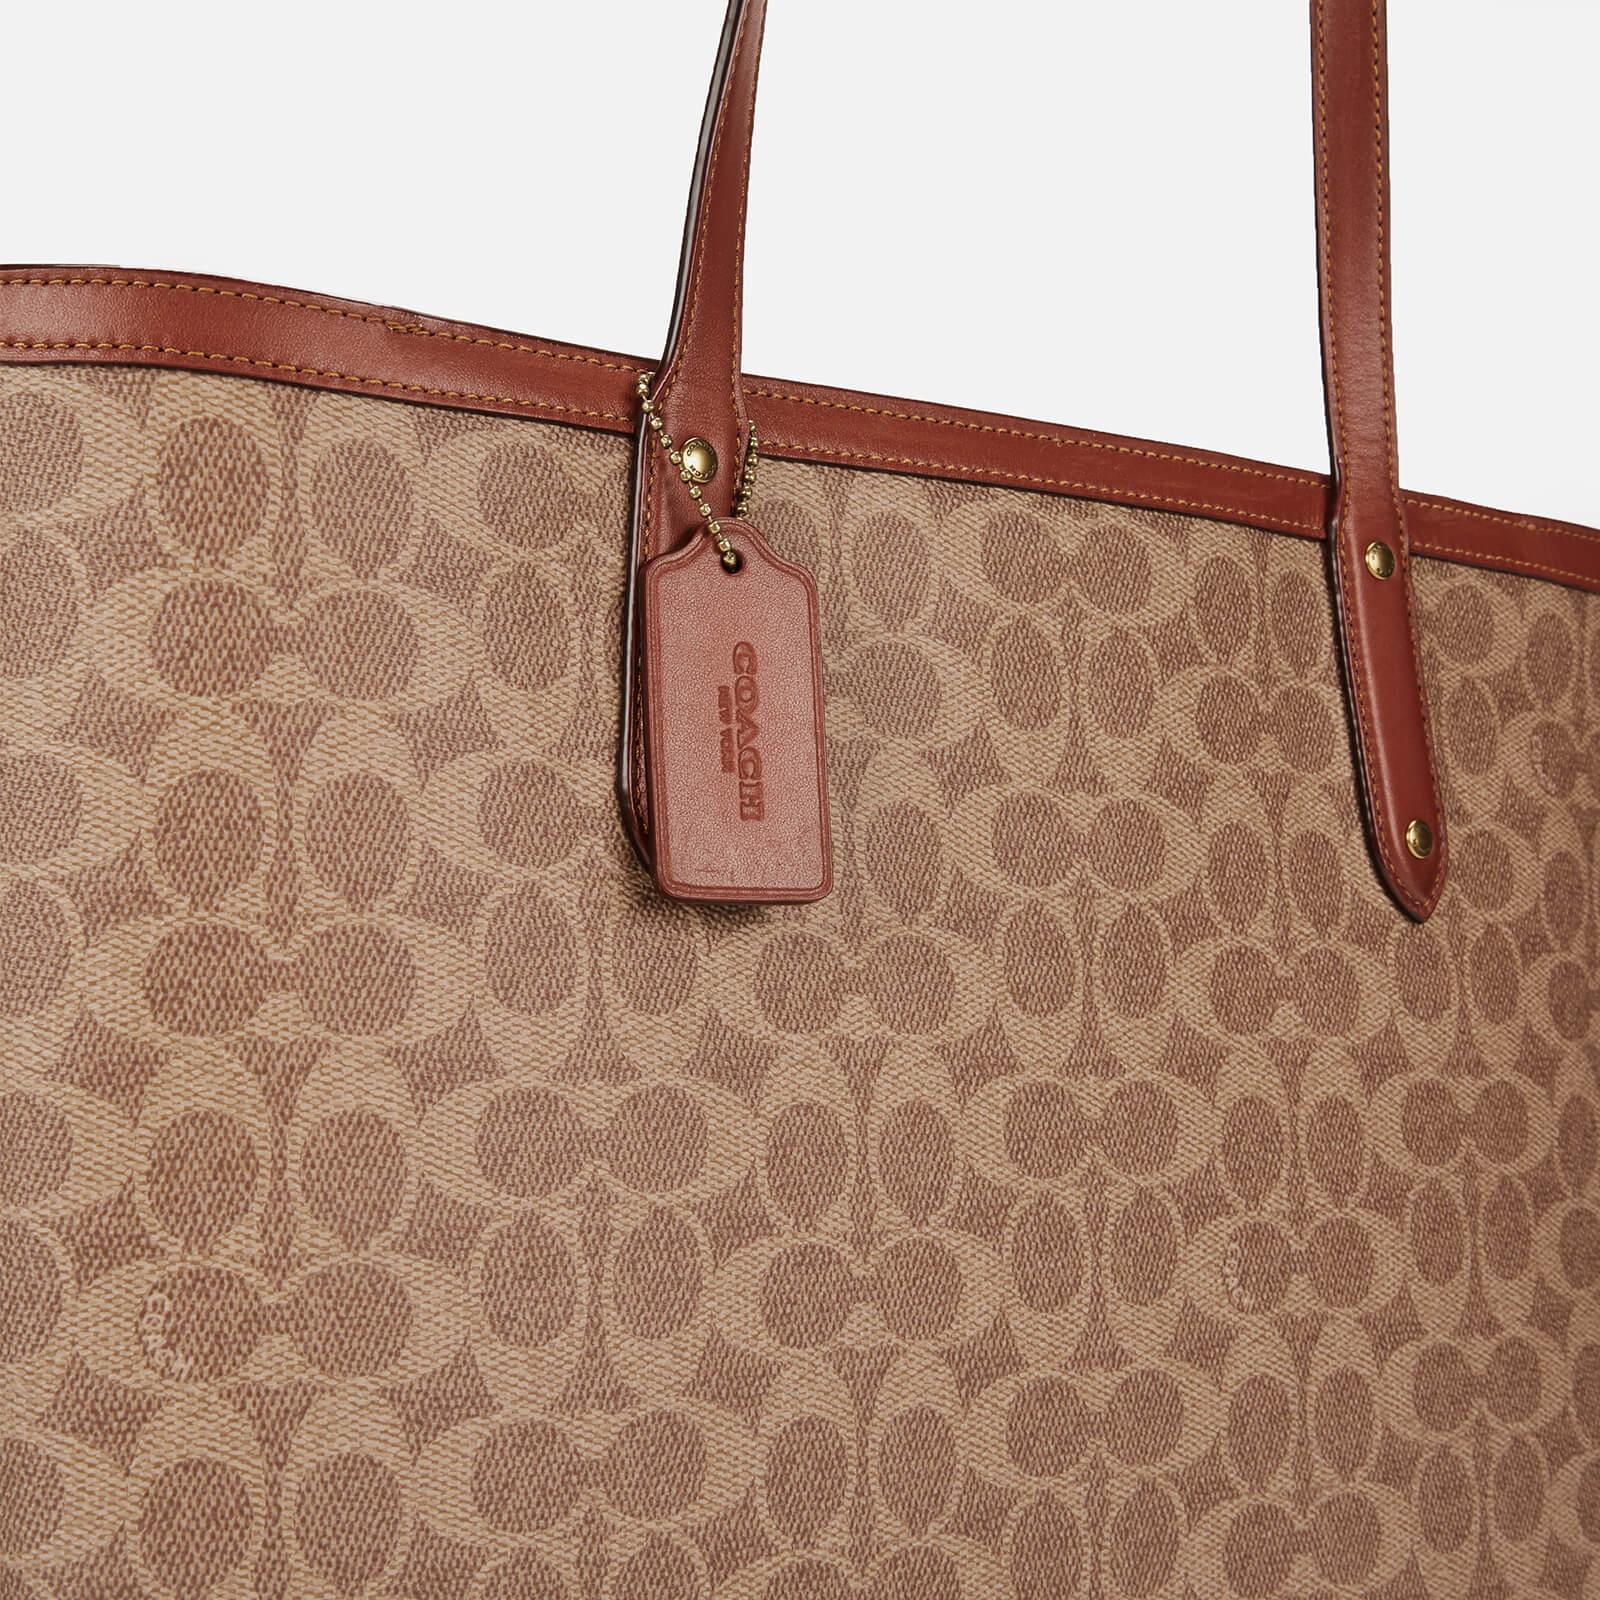 COACH Coated Canvas Signature Central Tote Bag in Brown